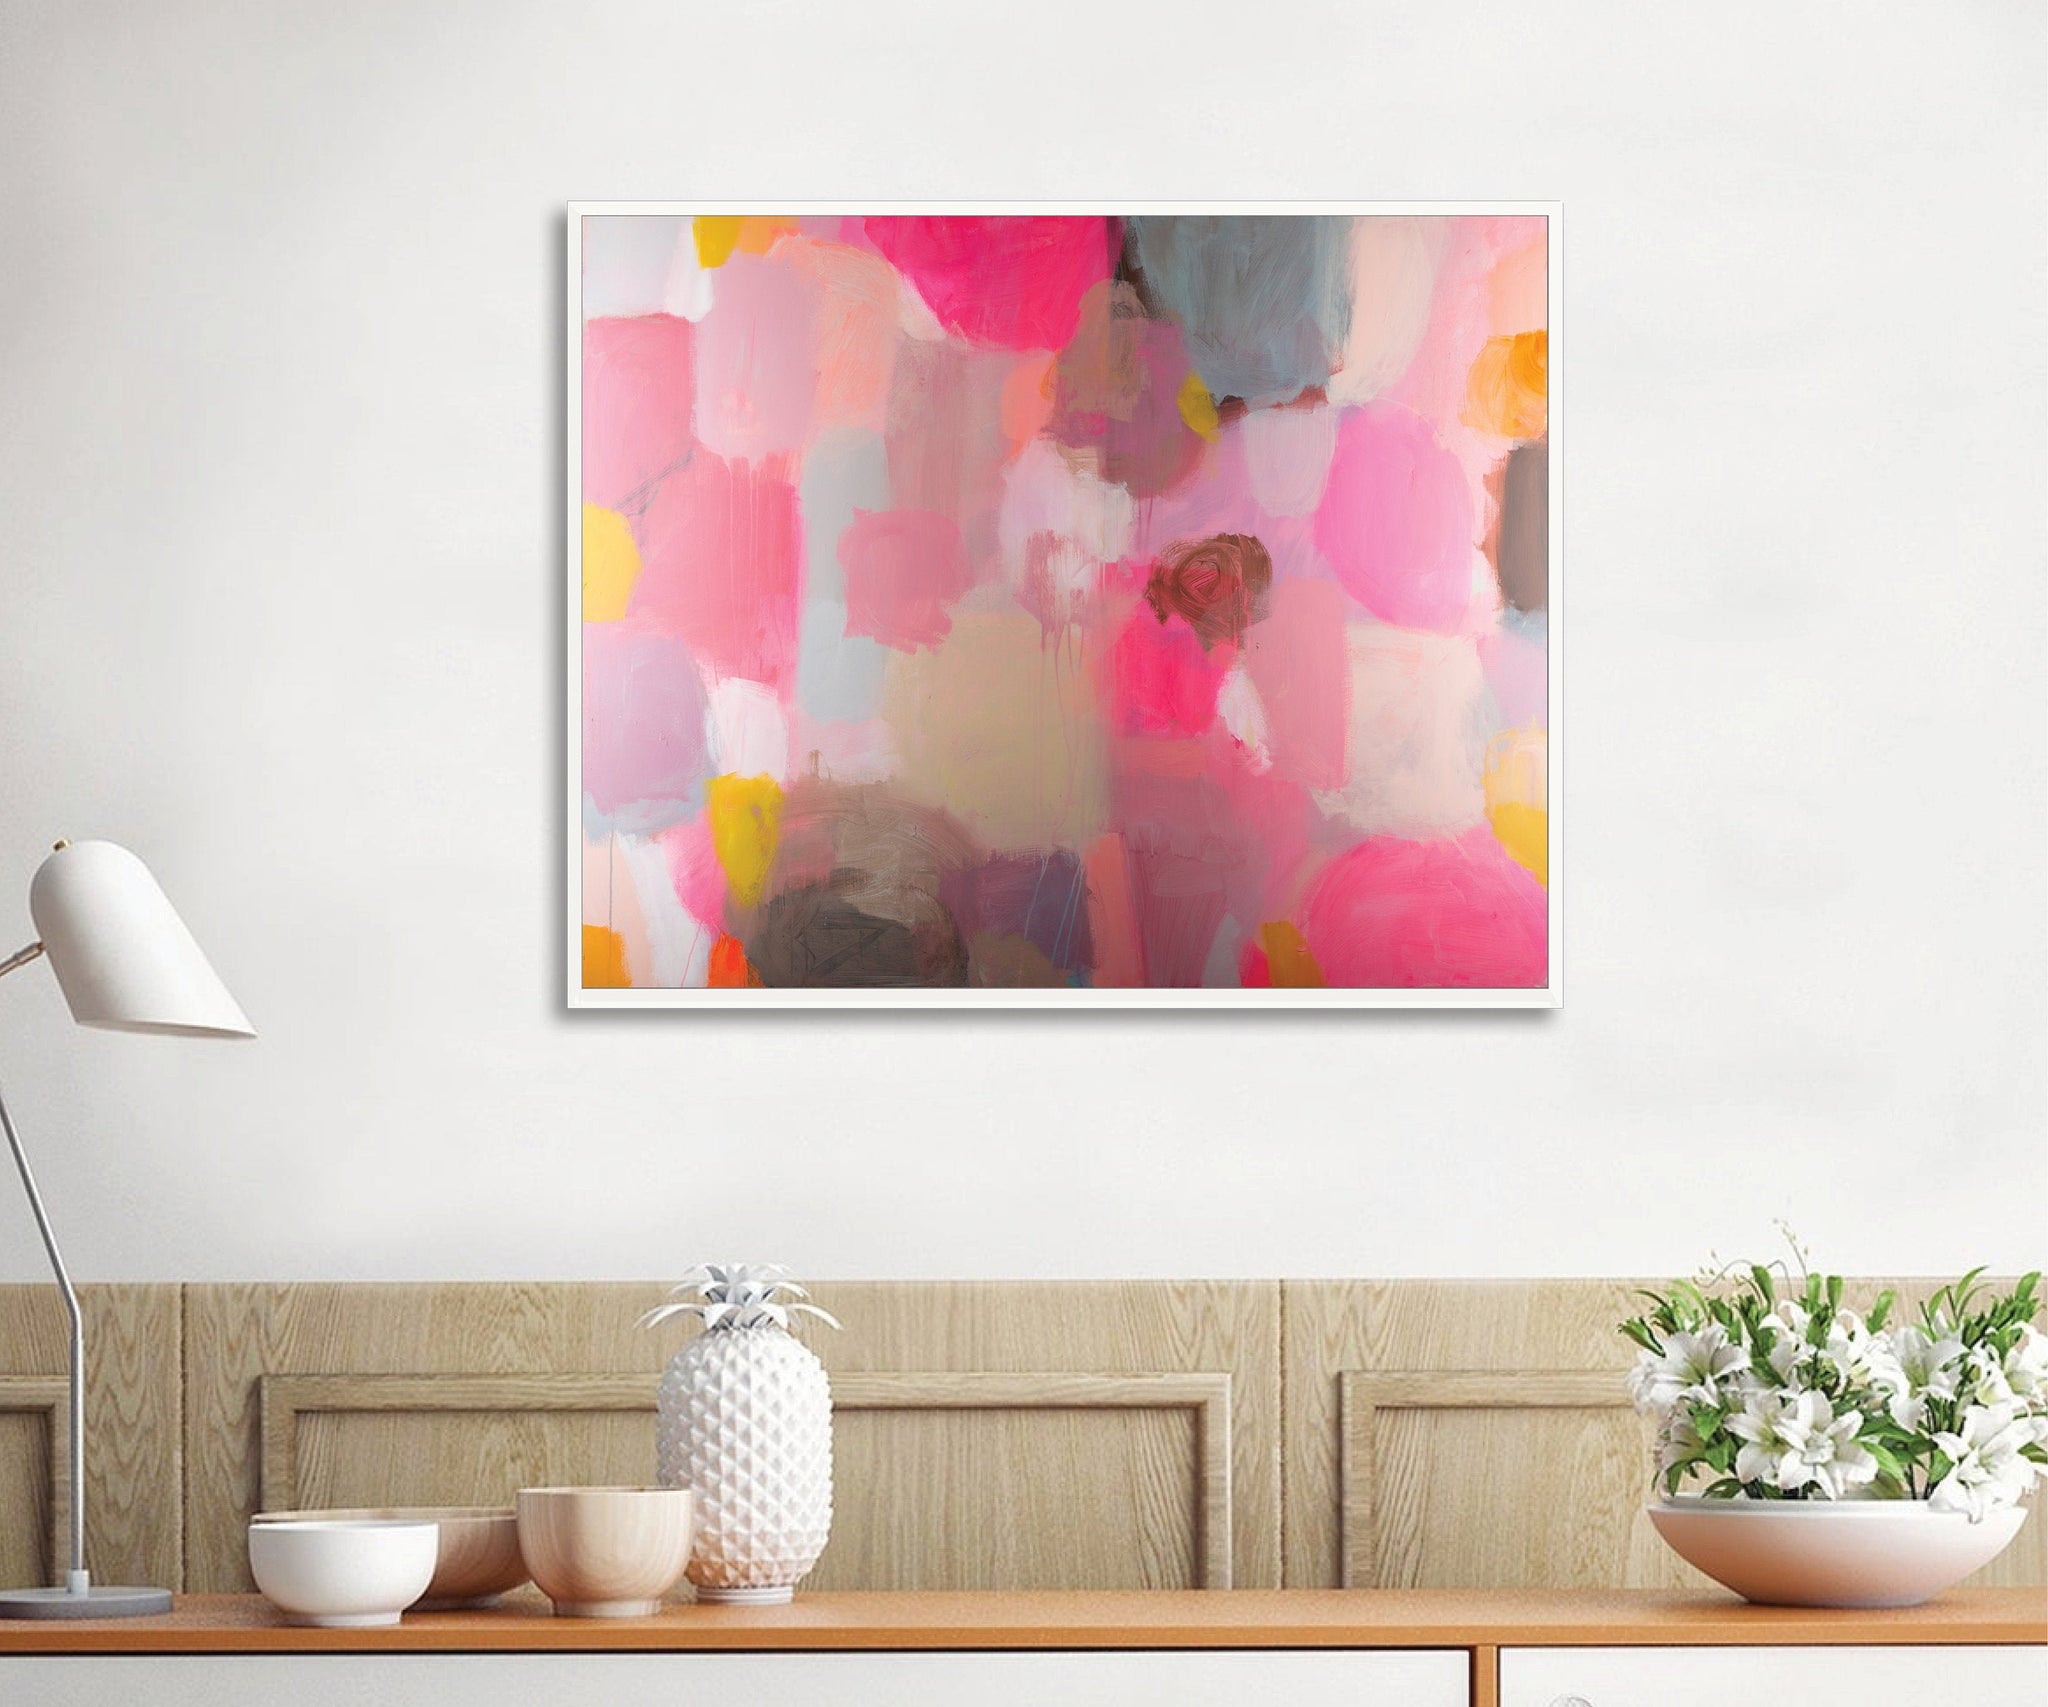 Colorful red pink extra large modern wall art, Landscape print, large abstract painting print, pink and yellow painting, acrylic abstract - camilomattis.com